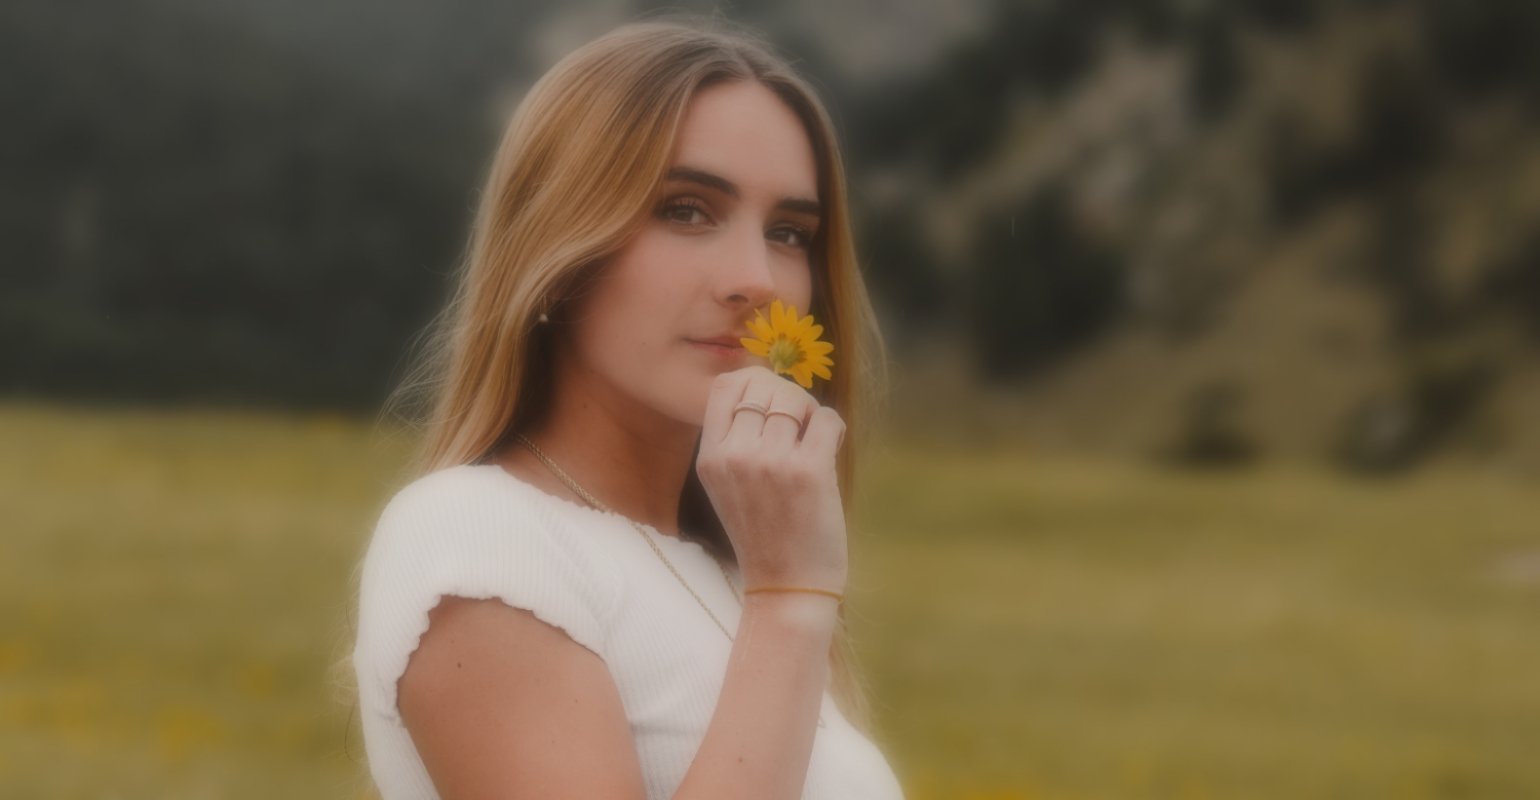 Blurry image of a girl holding a daisy